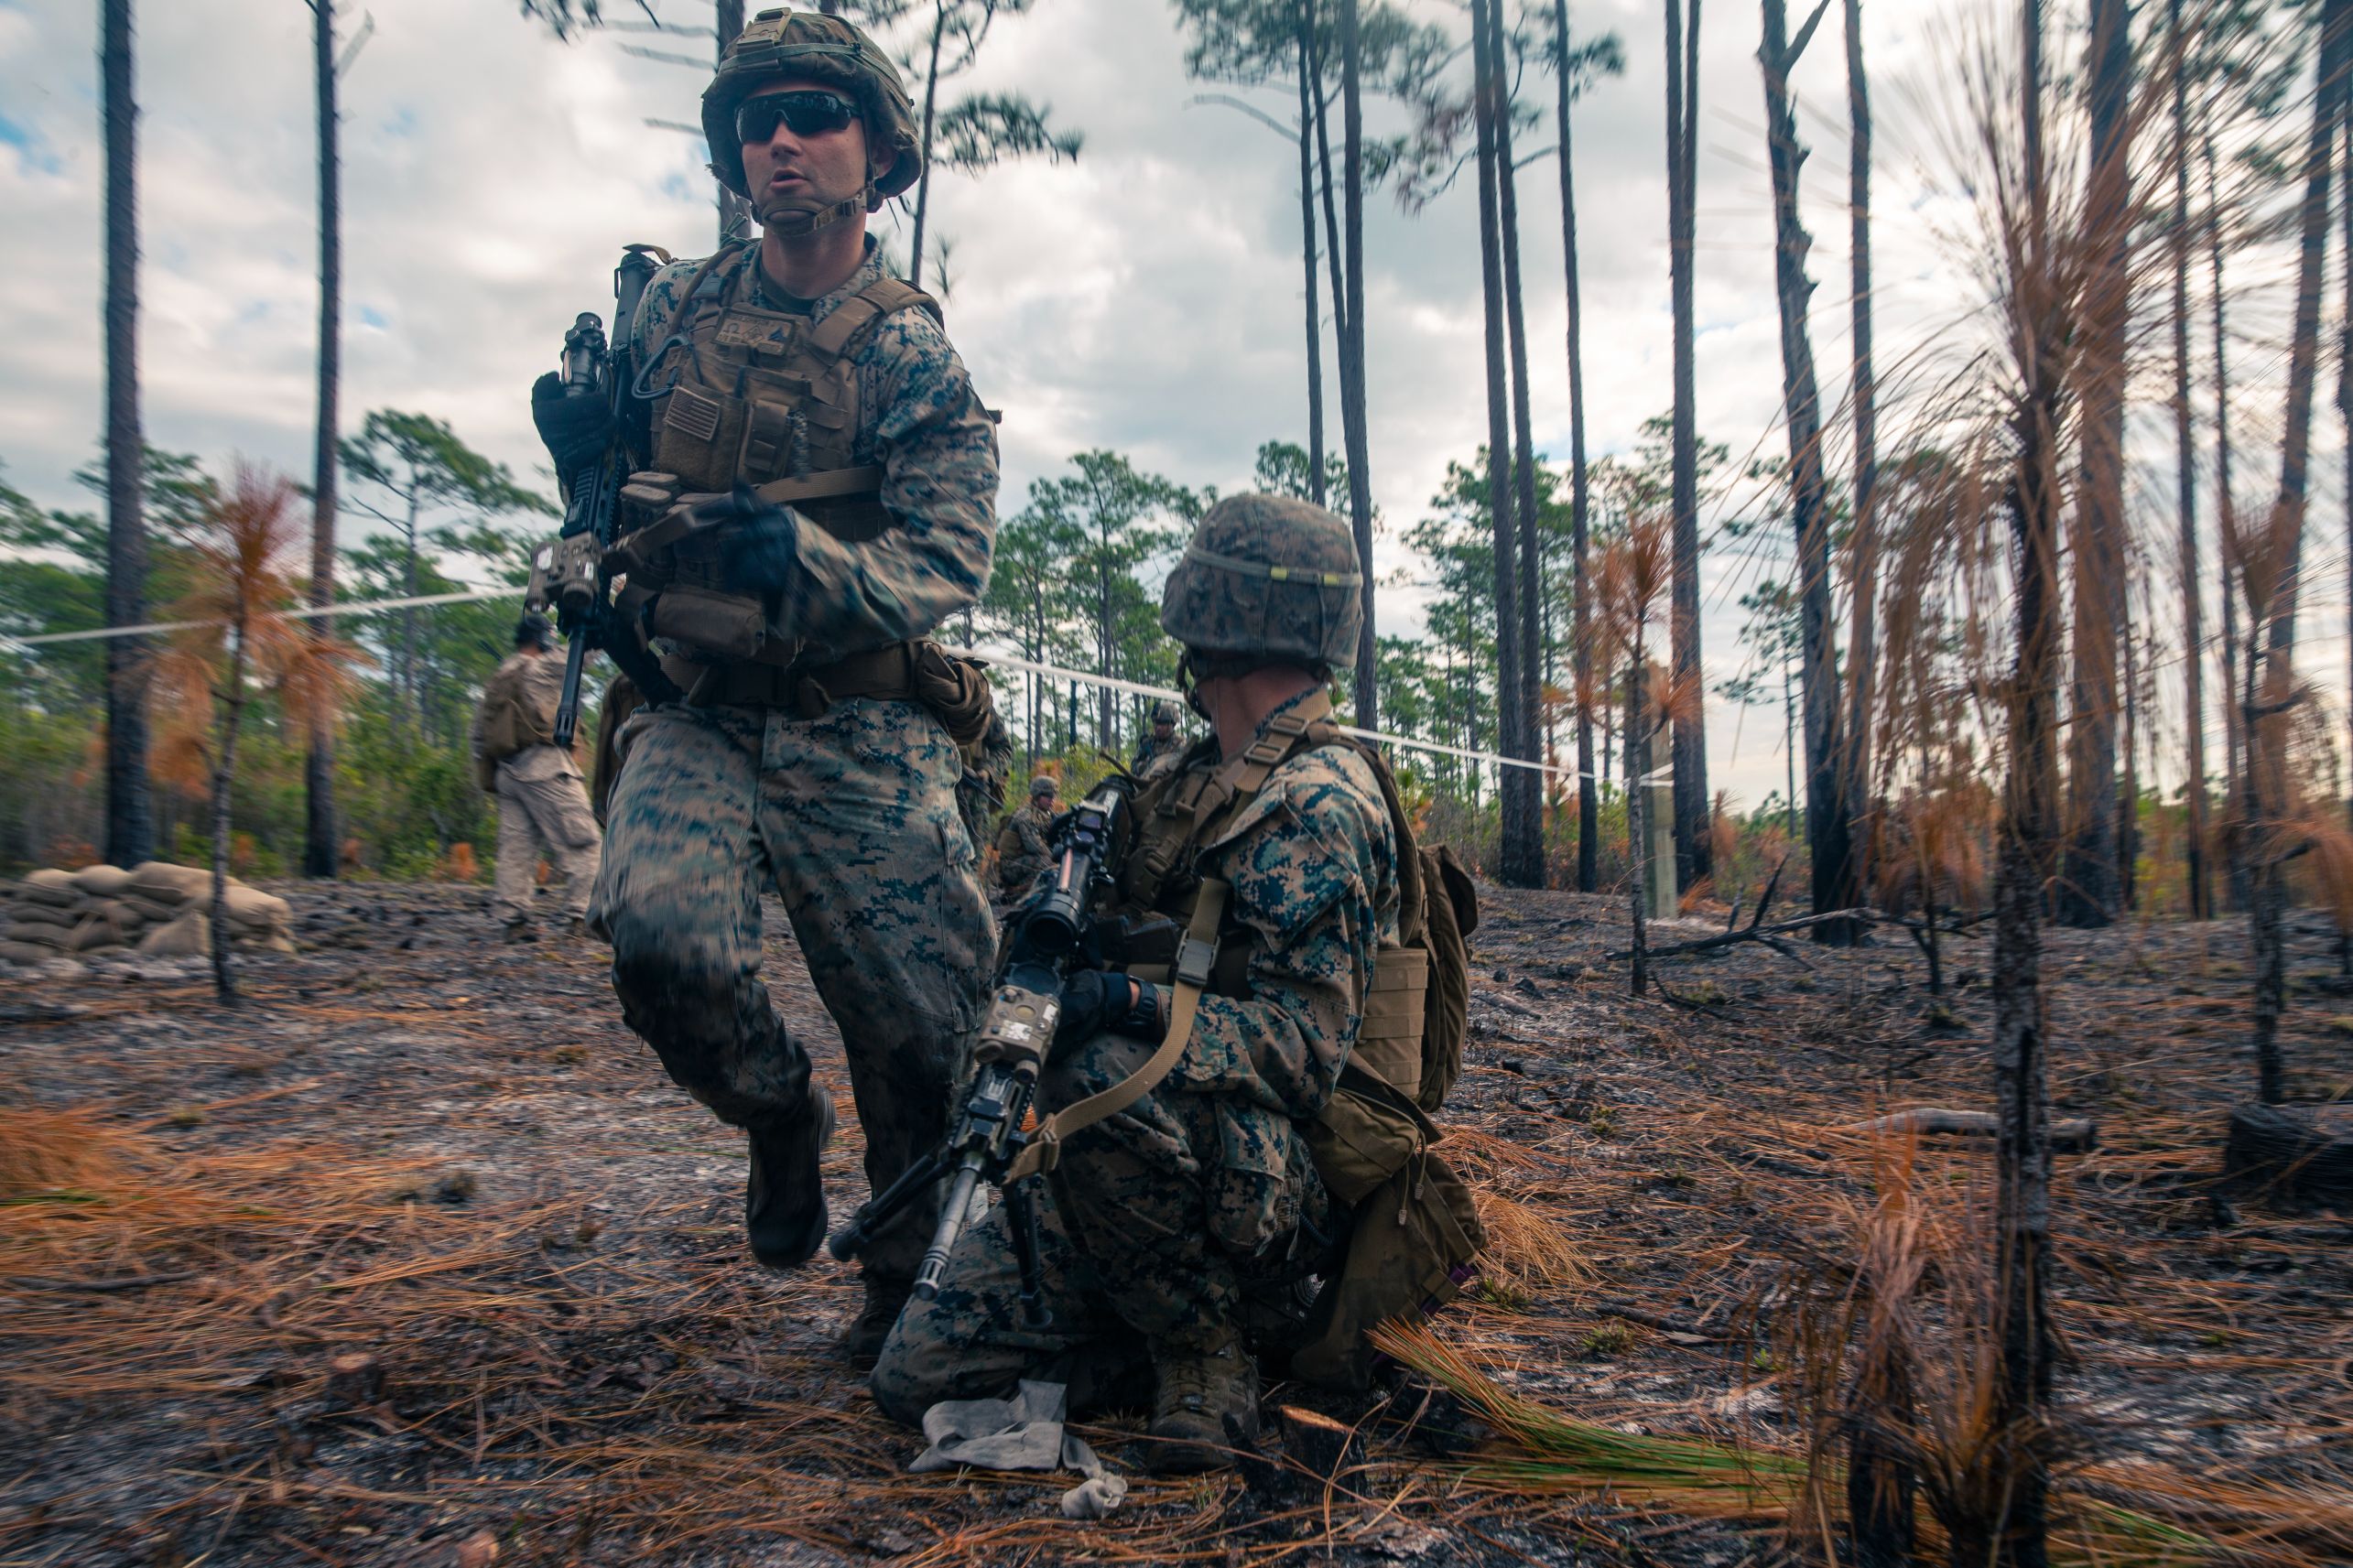 U.S. Marines with India Company, 3rd Battalion, 6th Marine Regiment, 2d Marine Division, participate in live-fire assaults on range Golf-36 (G-36), Camp Lejeune